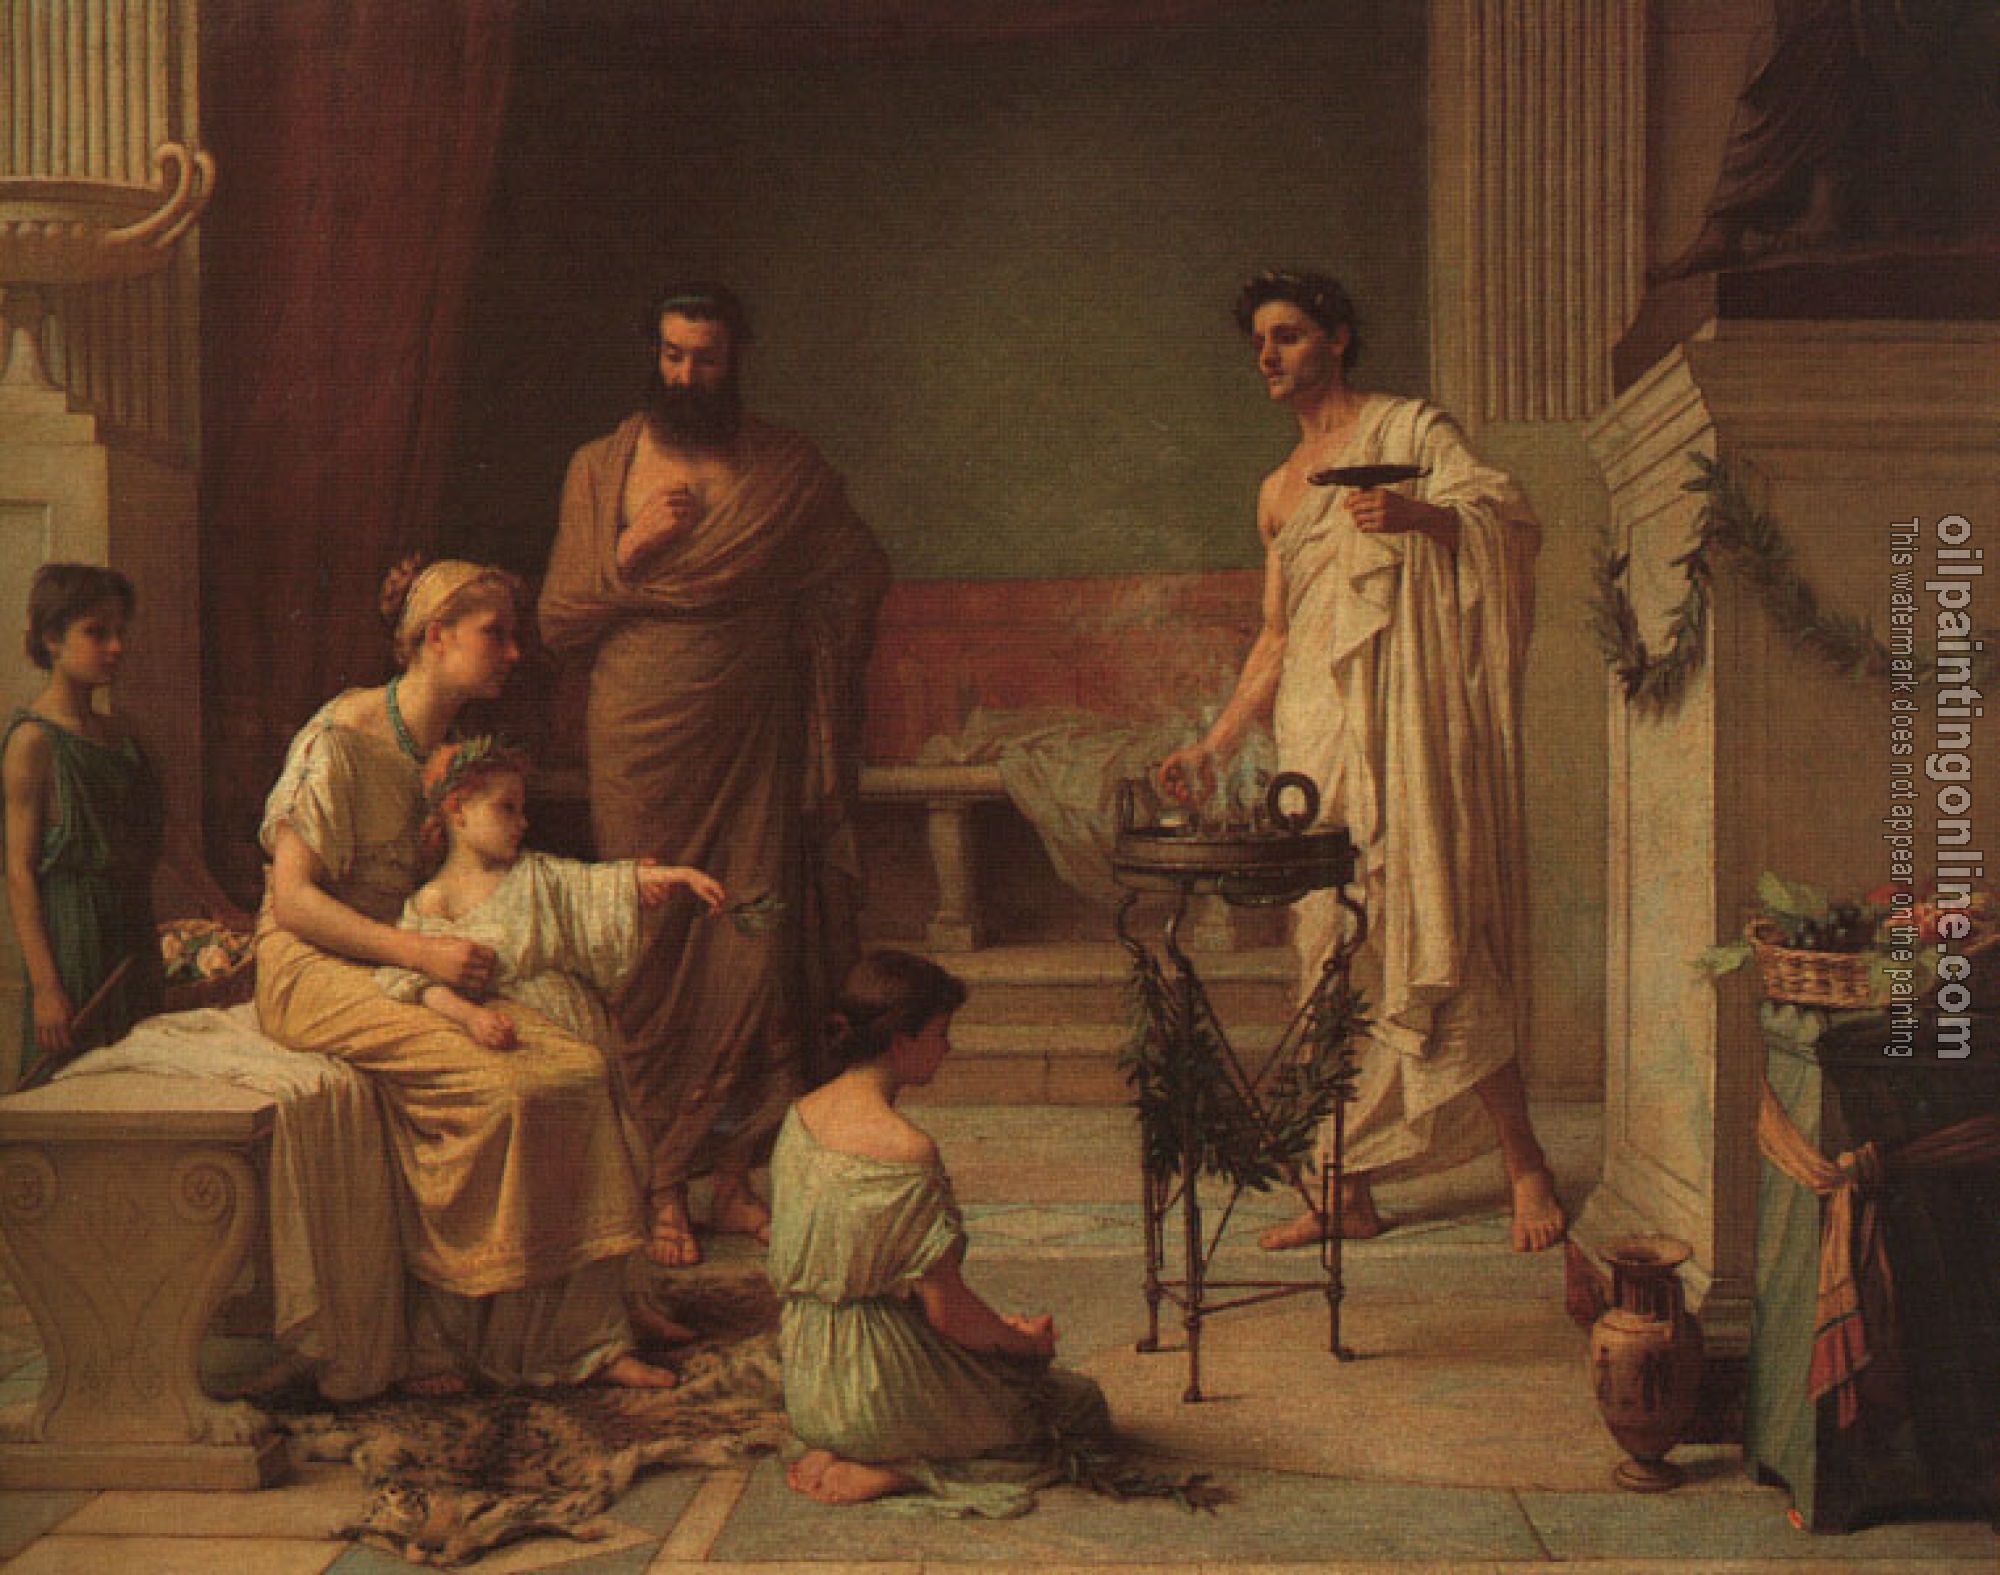 Waterhouse, John William - A Sick Child Brought into the Temple of Aesculapius